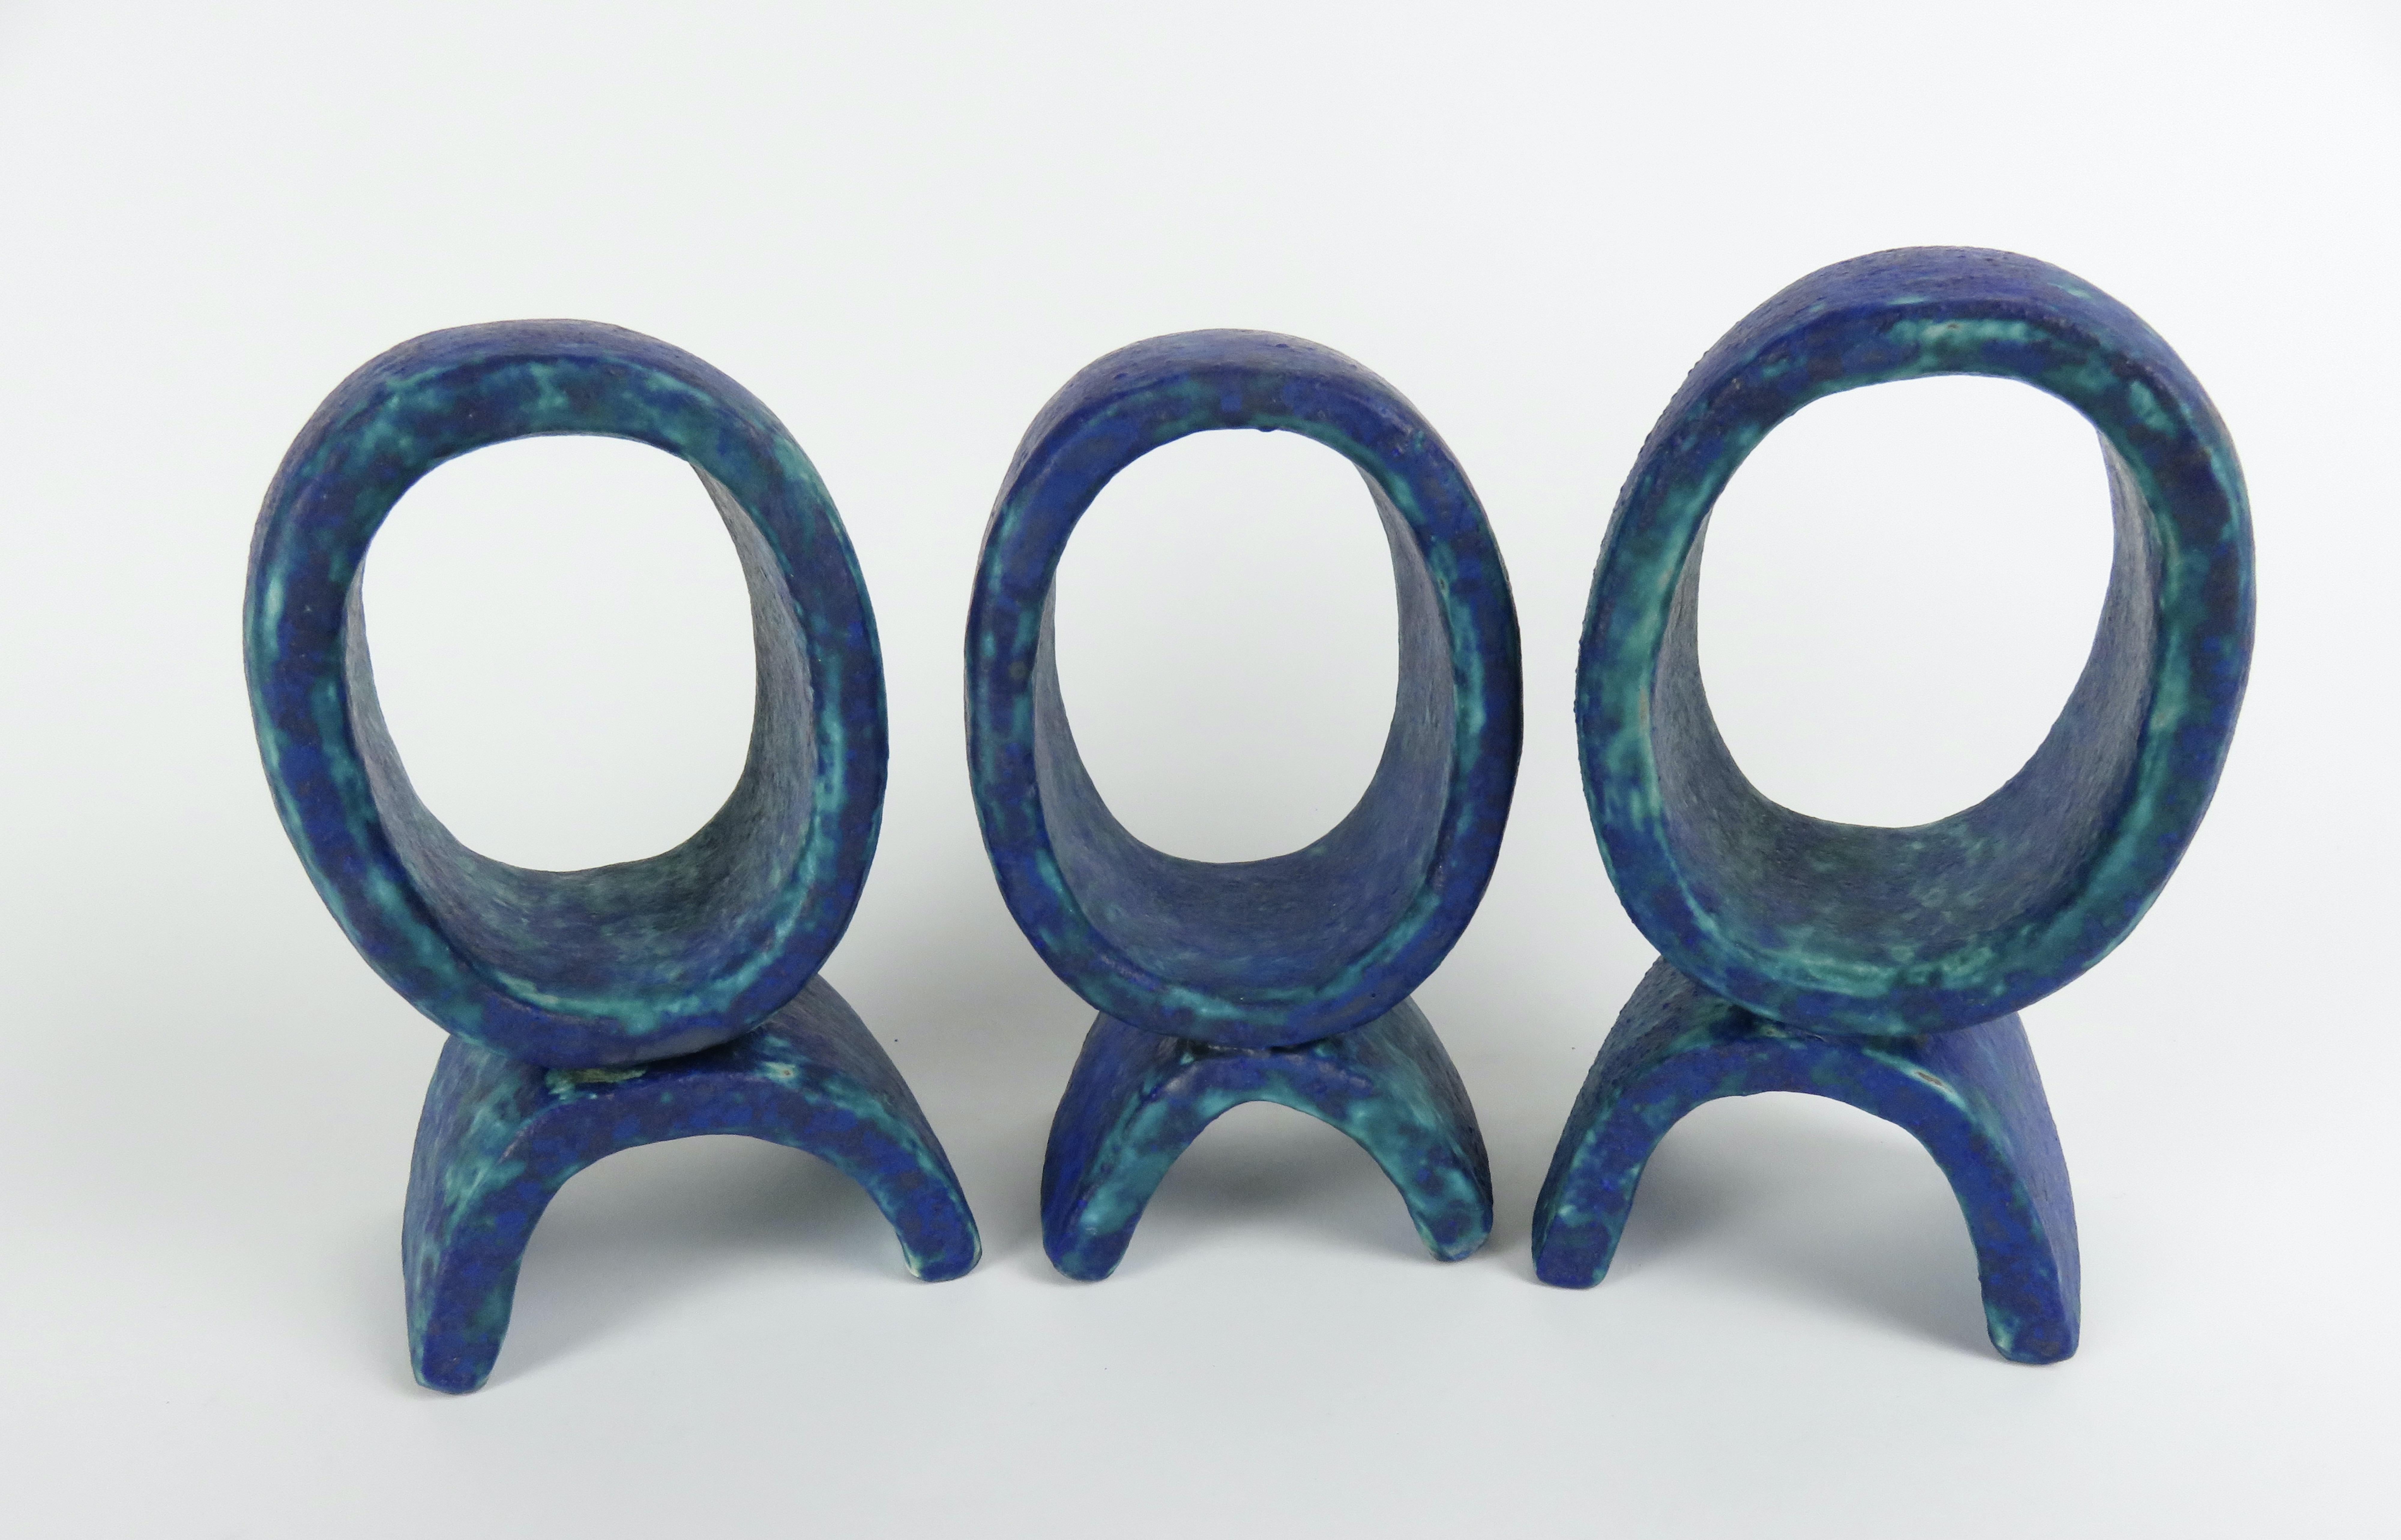 Mottled Turquoise and Deep Blue, 3 Ceramic Totems, Single Rings on Curved Legs For Sale 2